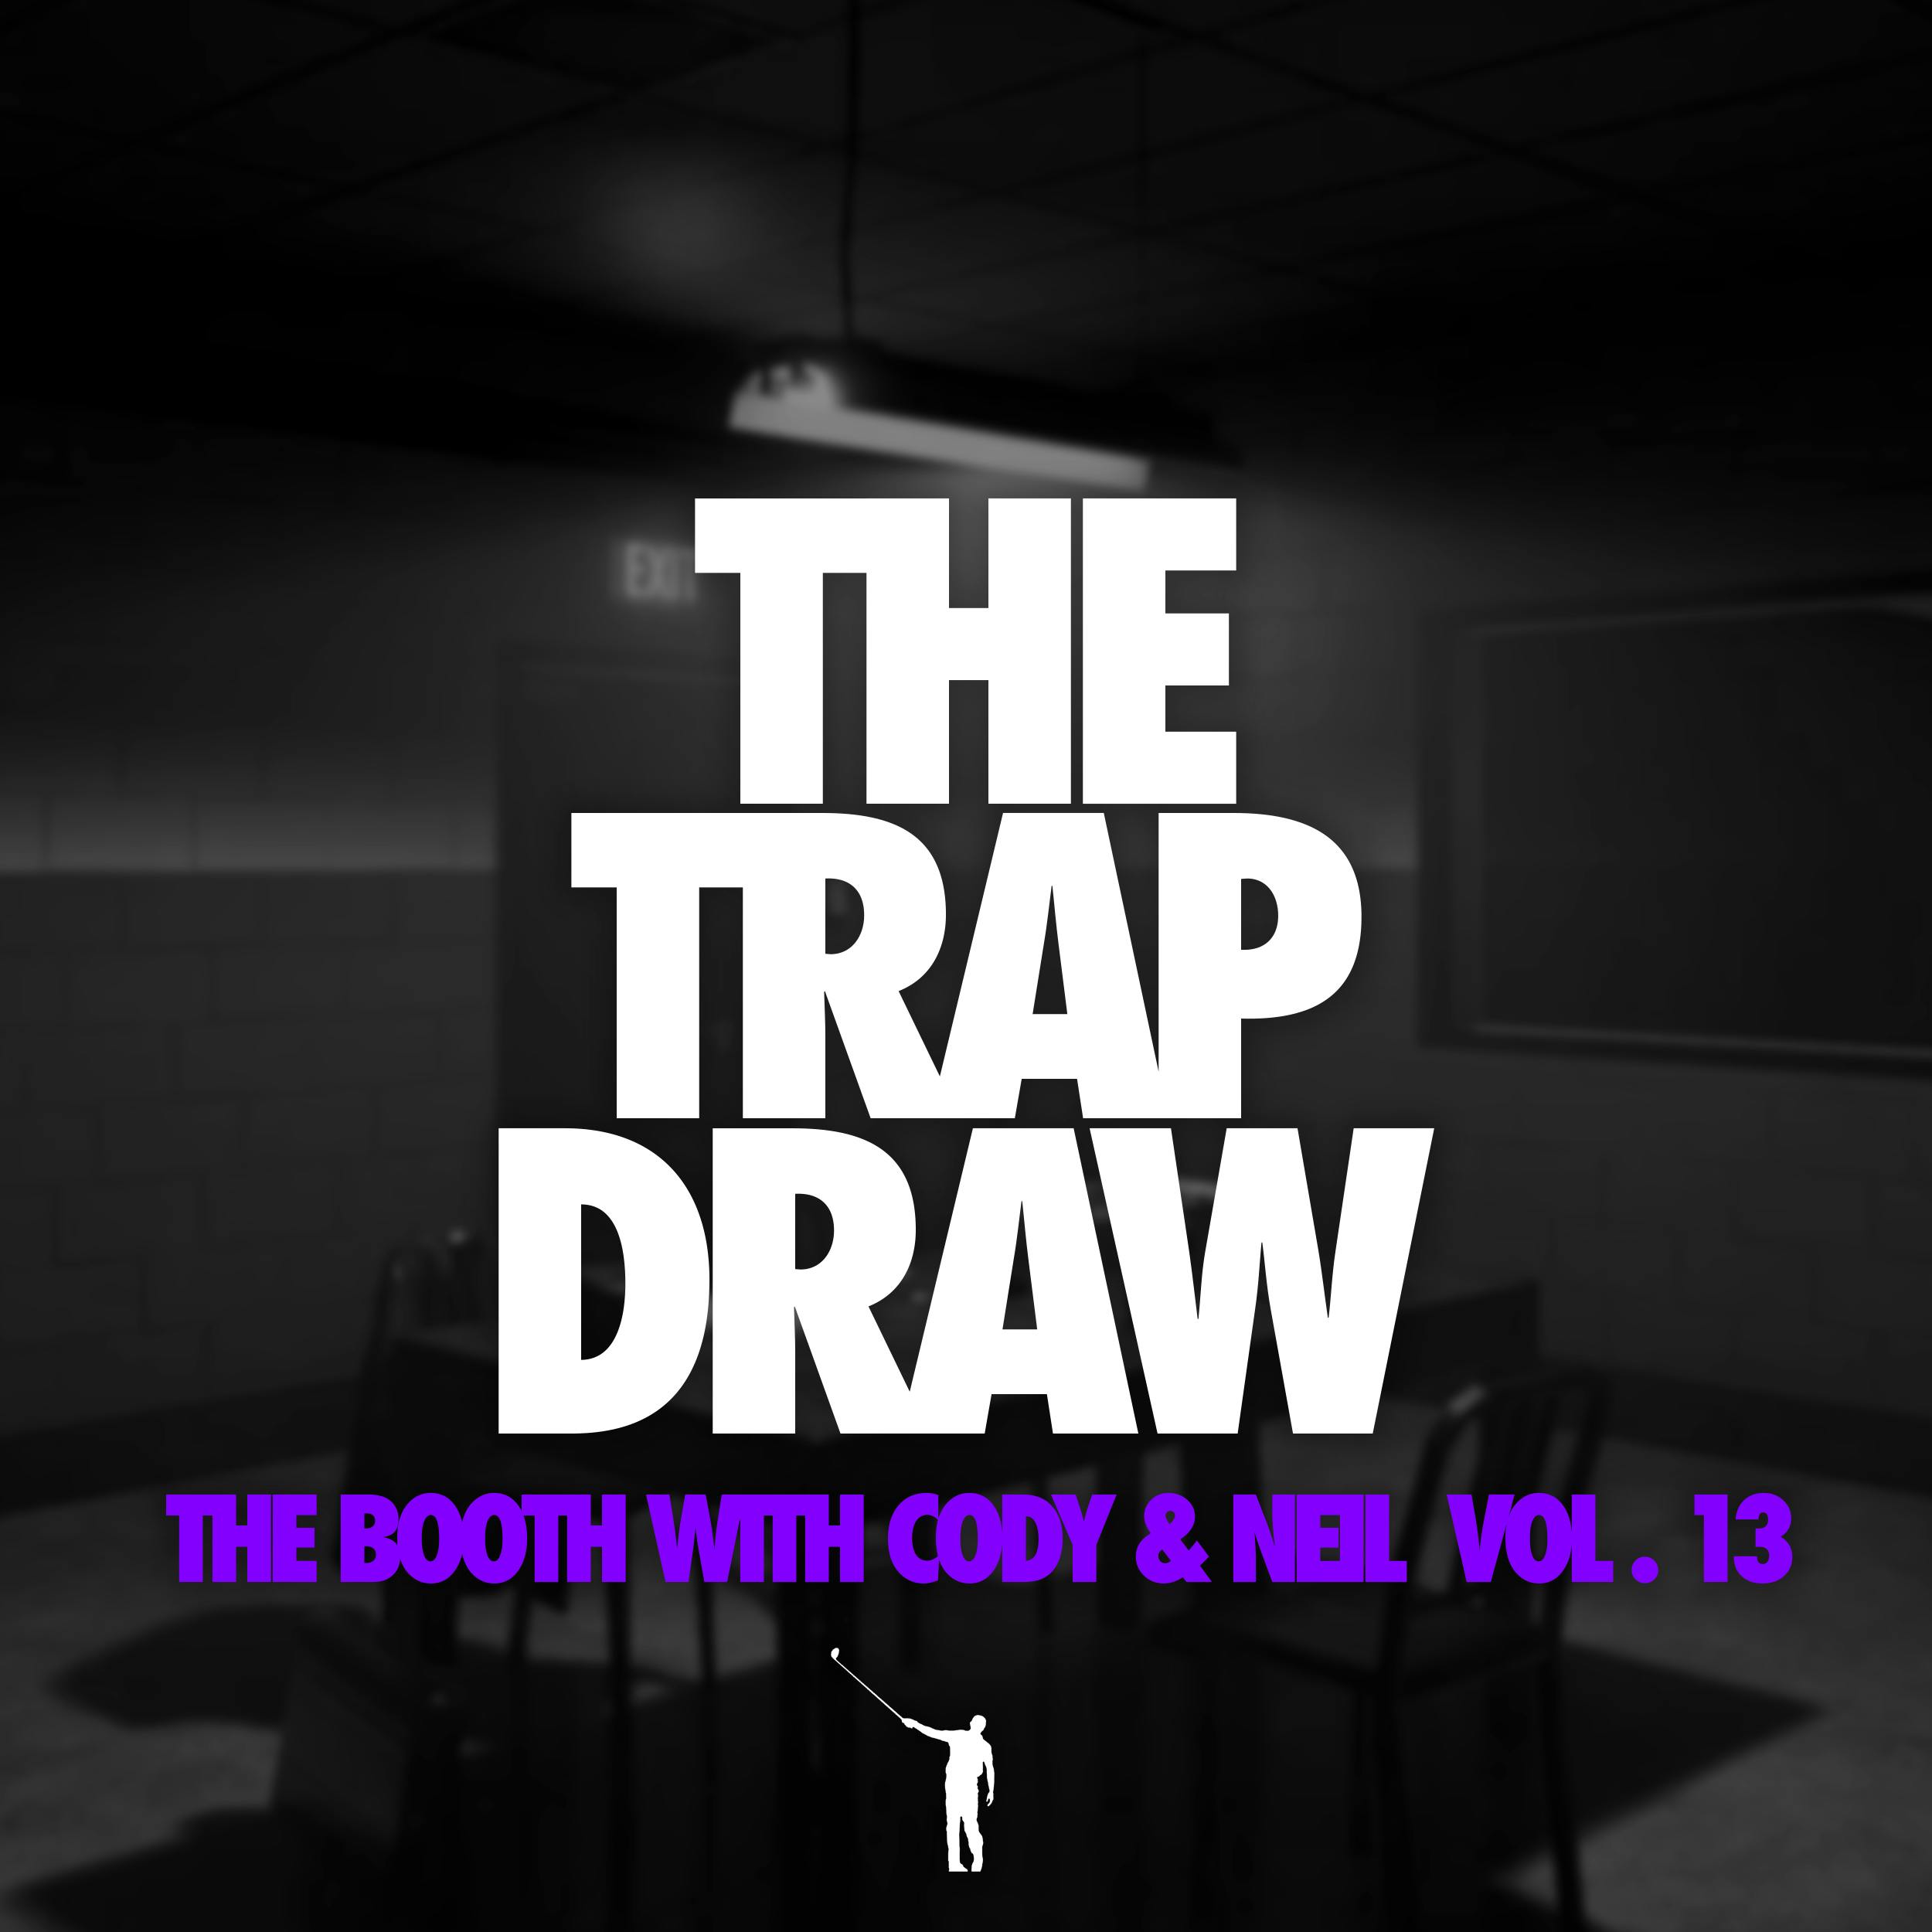 290: The Booth Vol. 13